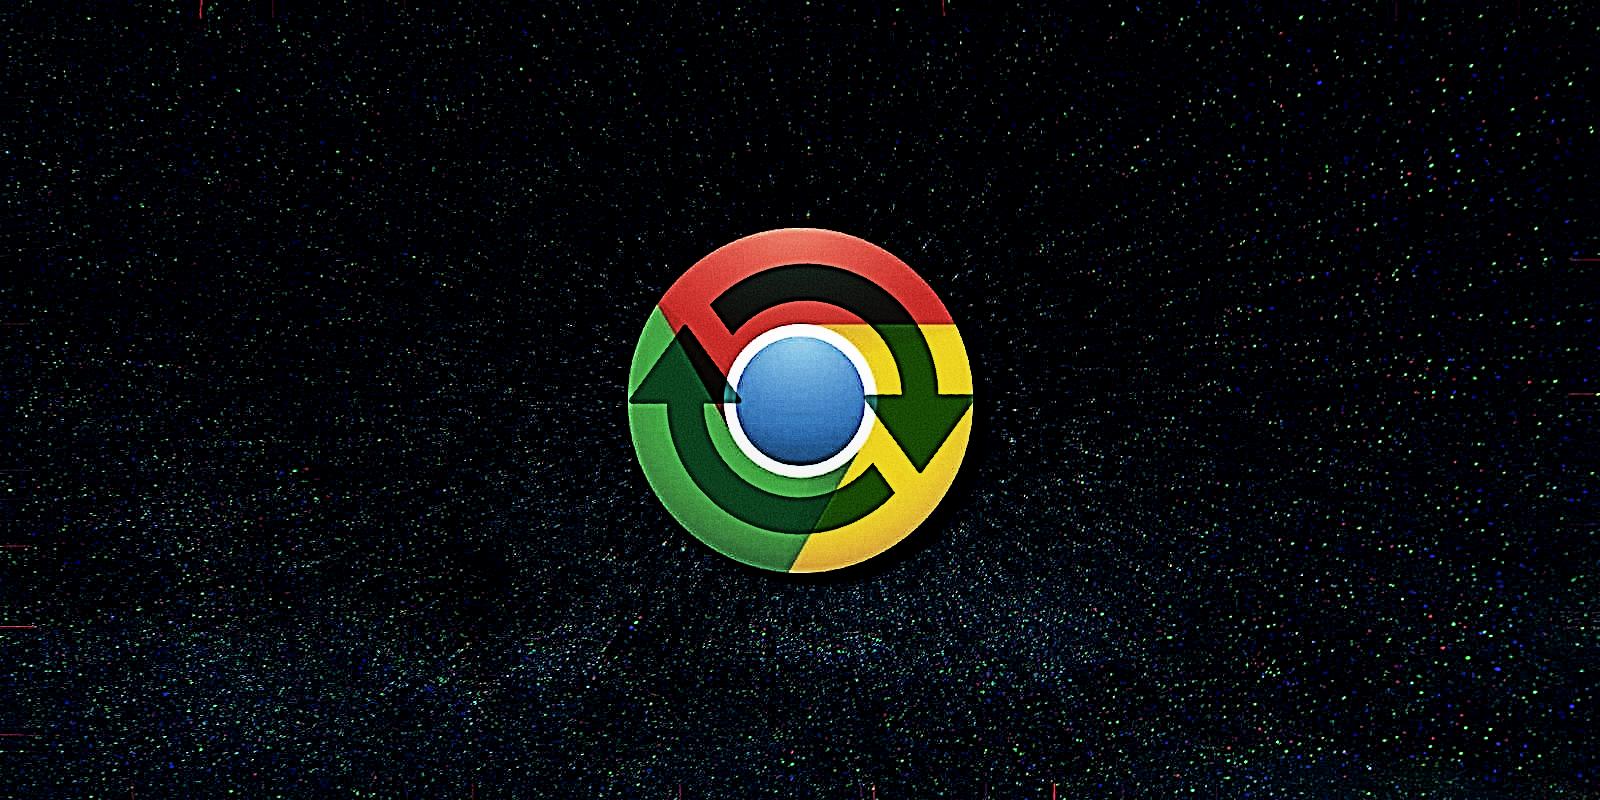 Malicious extension abuses Chrome sync to steal users’ data